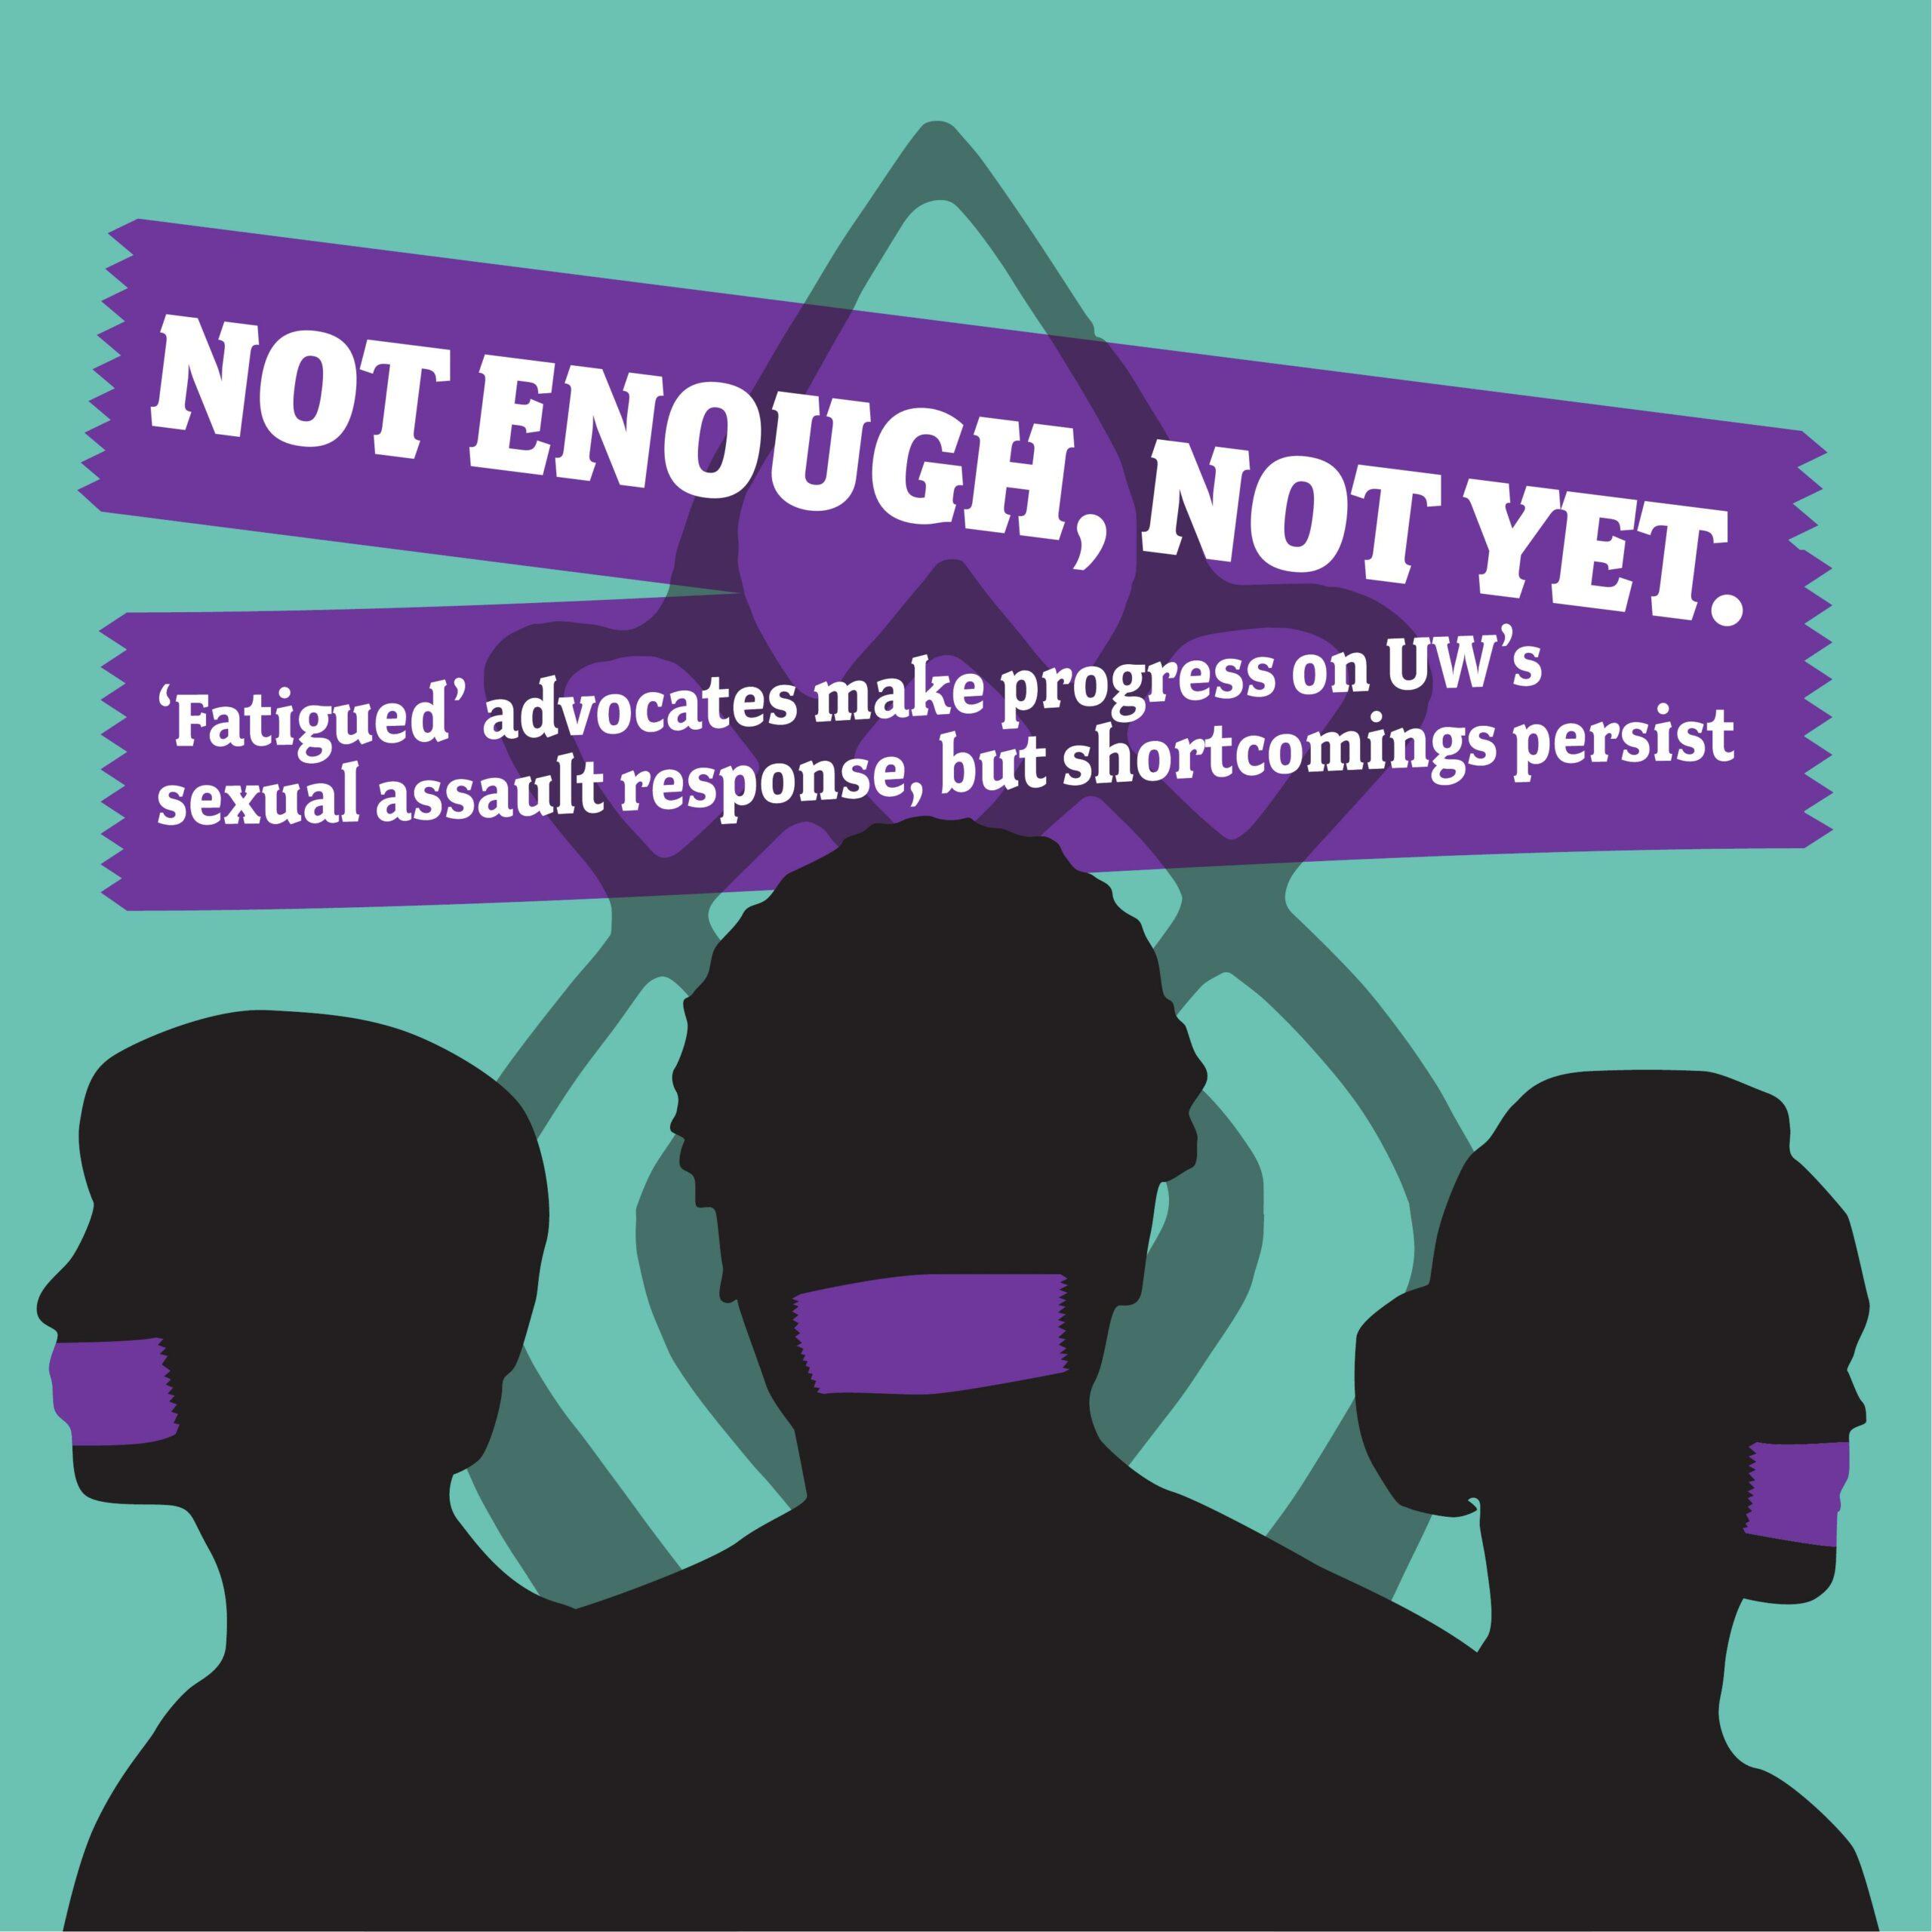 Not Enough Not Yet Uw Makes Progress On Sexual Assault Response But Shortcomings Persist